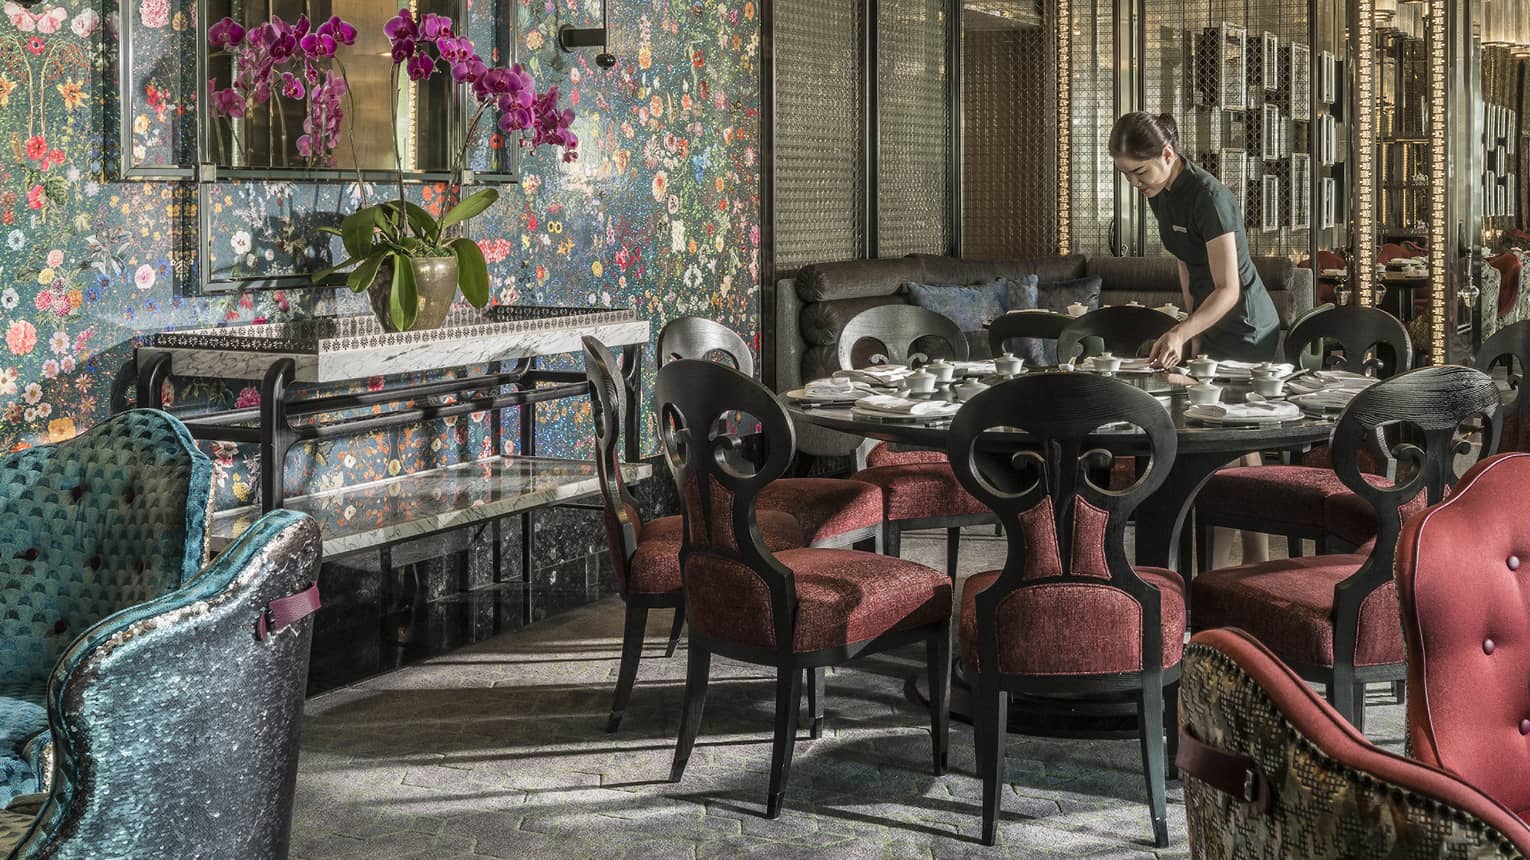 Hotel staff sets table with elegant red velvet chairs under tall mirror, floral wallpaper 